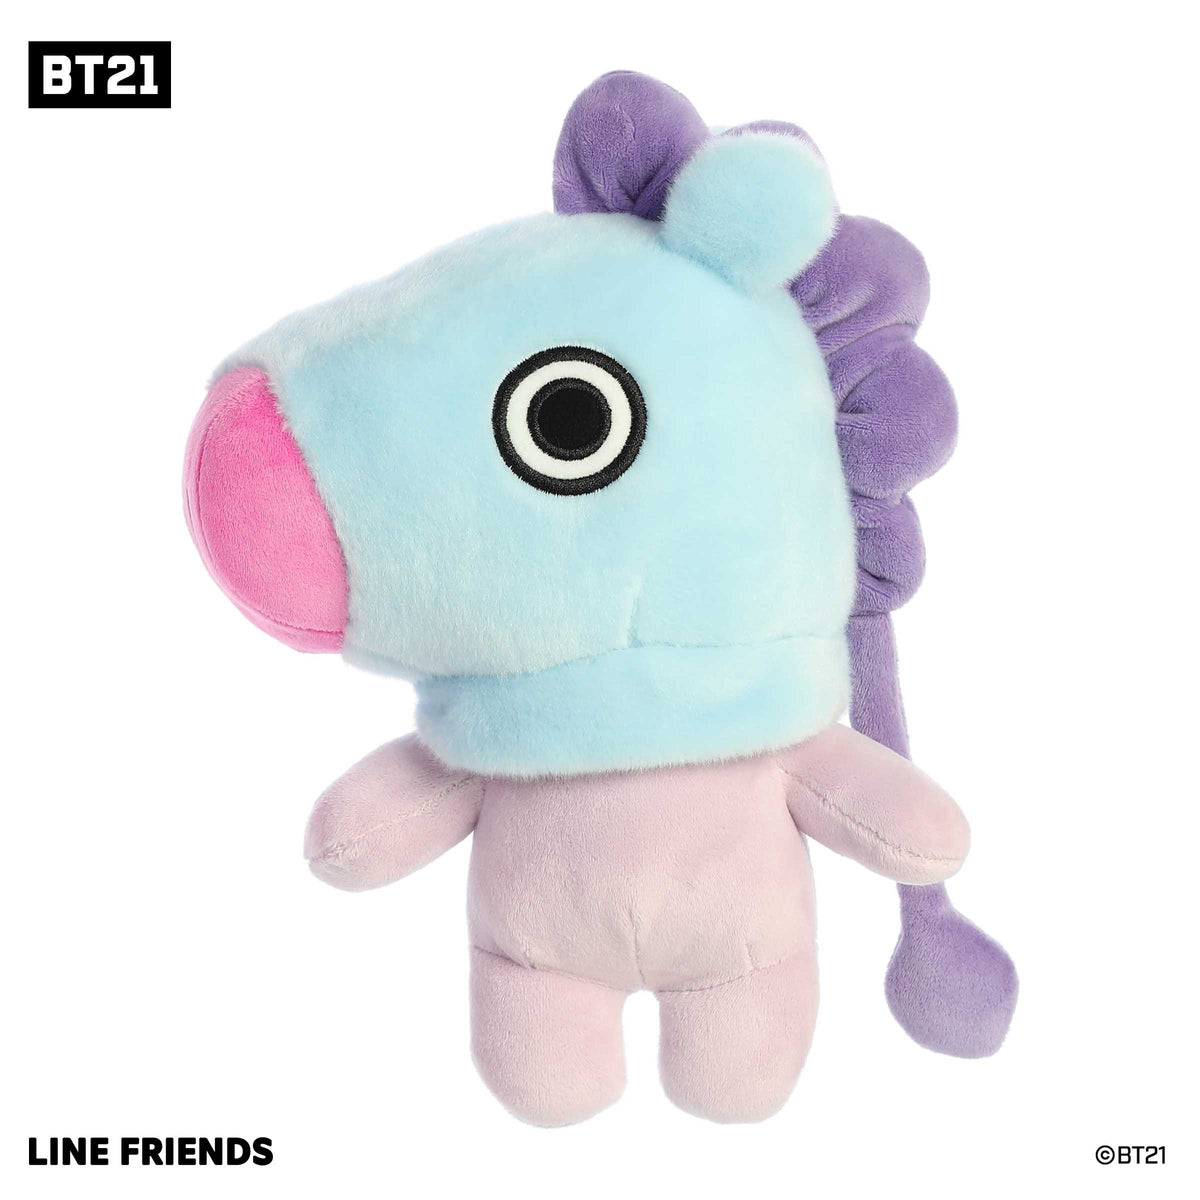 MANG Plush in dazzling blue with pink and purple accents, representing BT21's dancing aficionado with a mysterious mask.